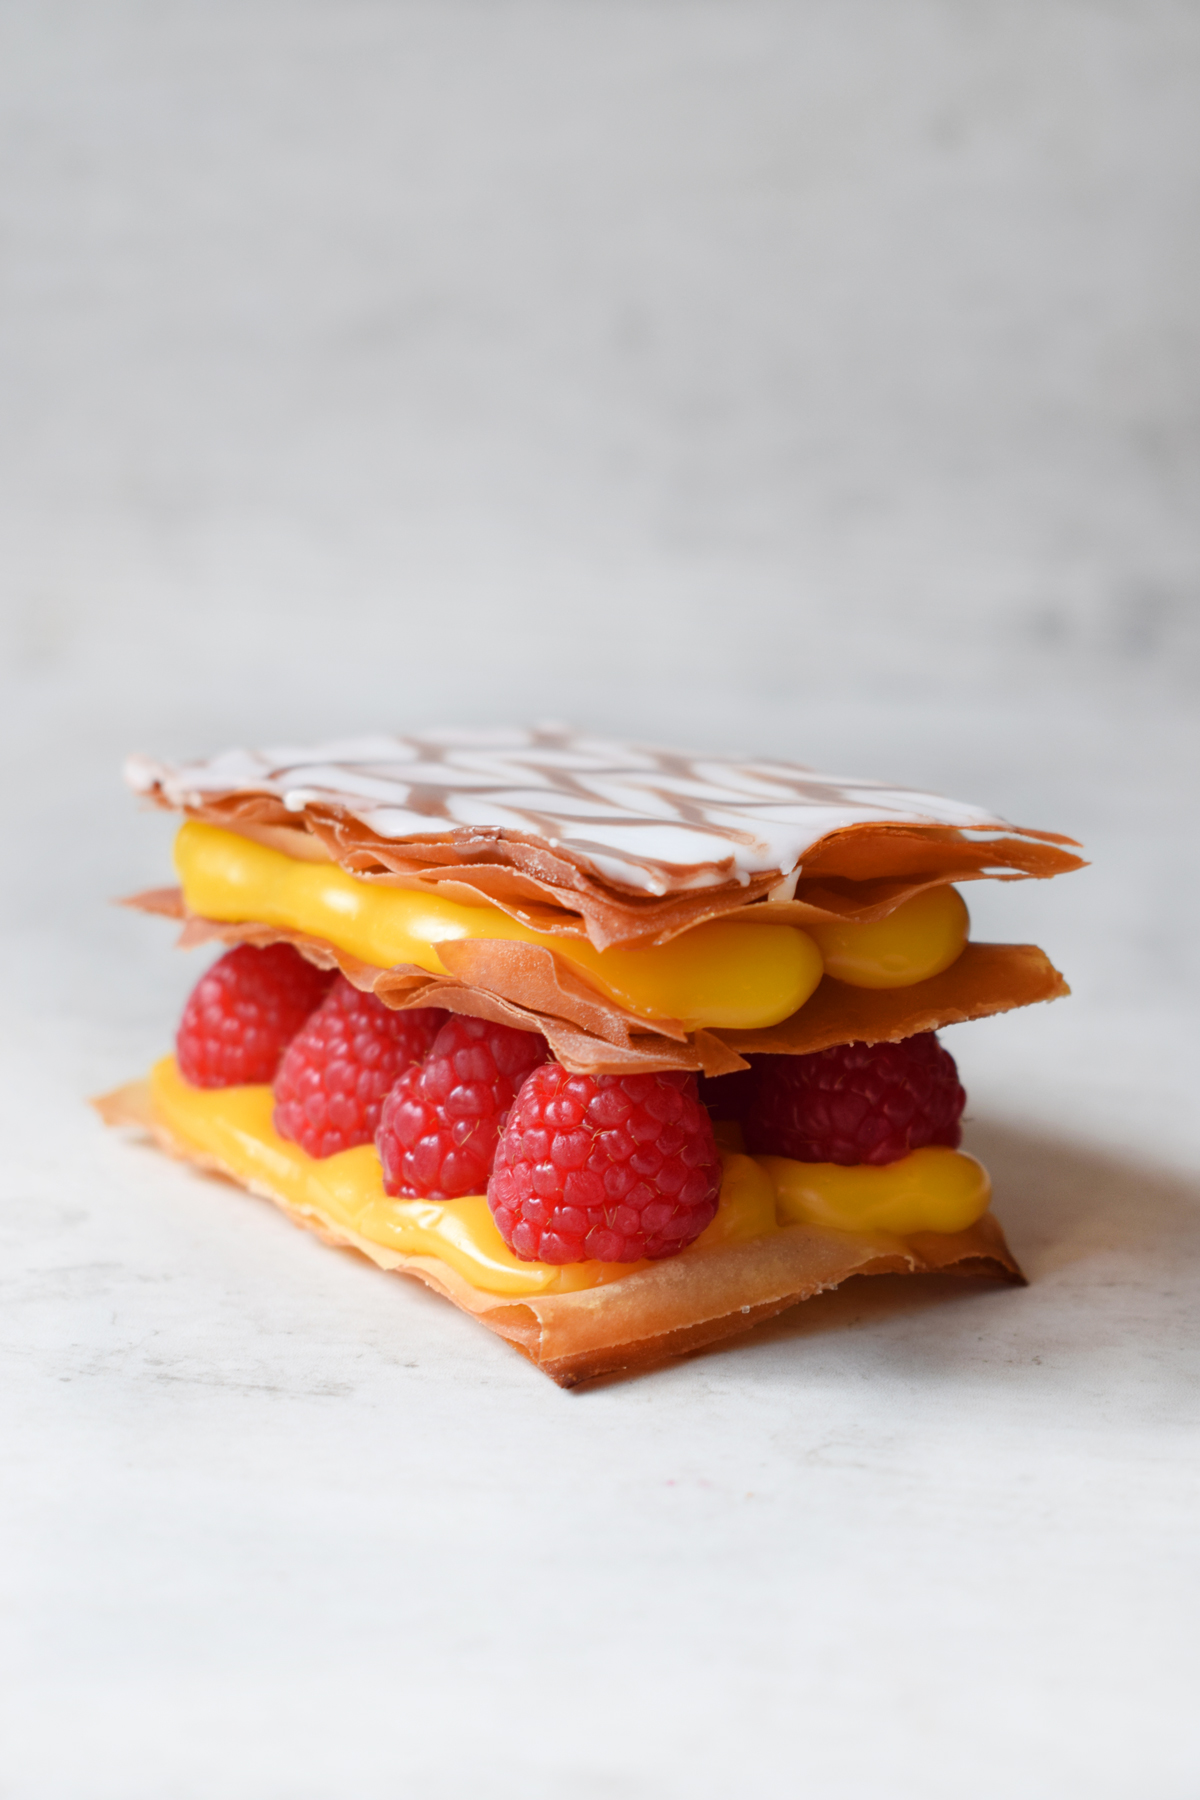 Lemon Mille Feuille with Phyllo Dough - Baran Bakery